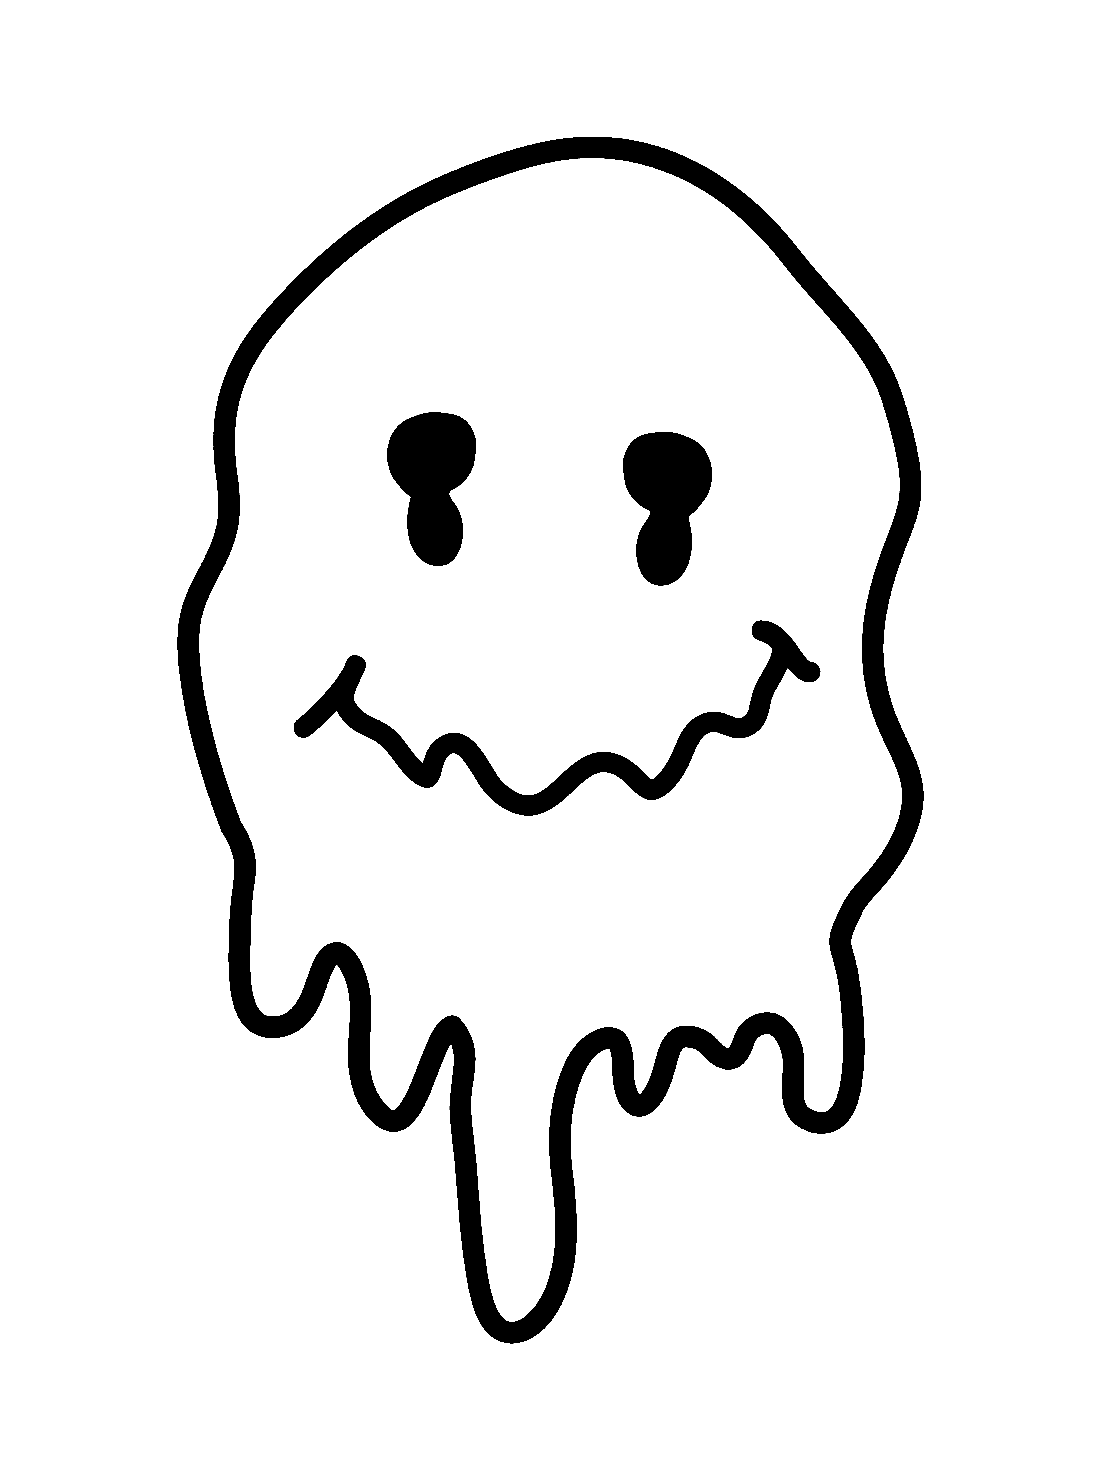 Slime ghost face